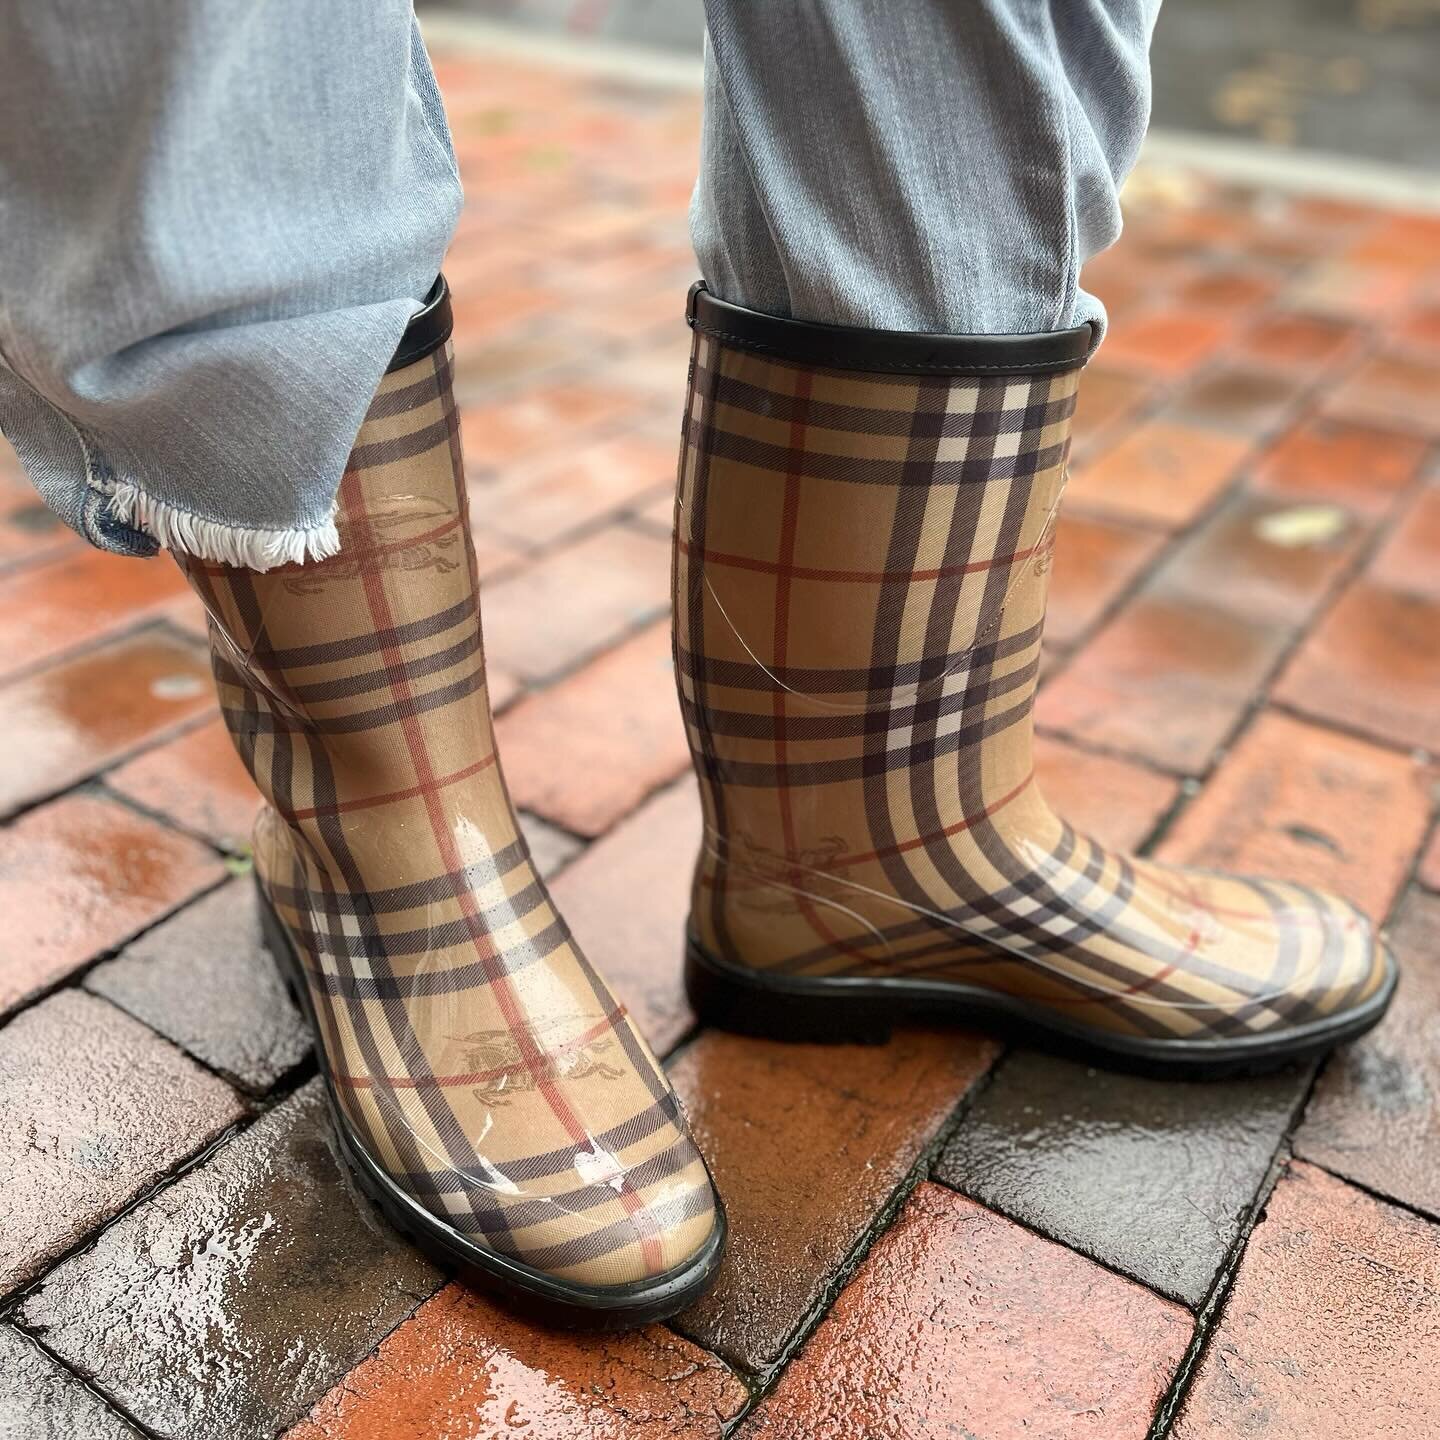 Northern Downpour sends its love 🫶🏼 come splash around with us - we&rsquo;ve got the perfect gear for the rainiest of days ✨ 

Designer Nova Check Rain Boots with Leather trim: size 40, $175.95
 

@greenestreetredbank to purchase 

For inquires cal